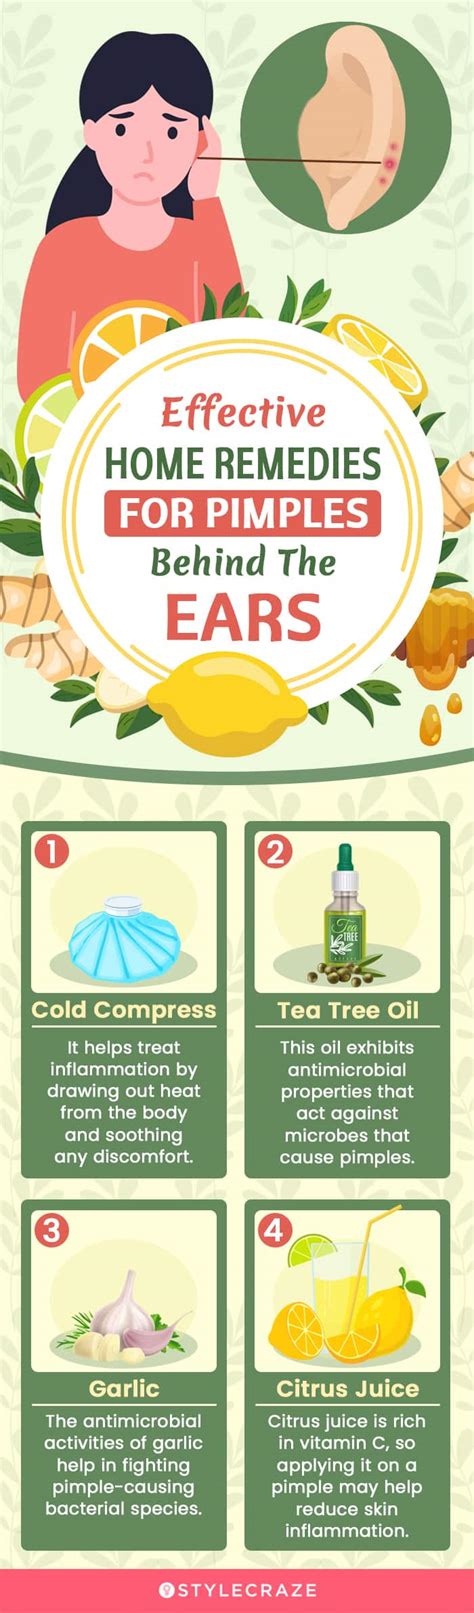 Pimples Behind The Ears 6 Home Remedies And Causes